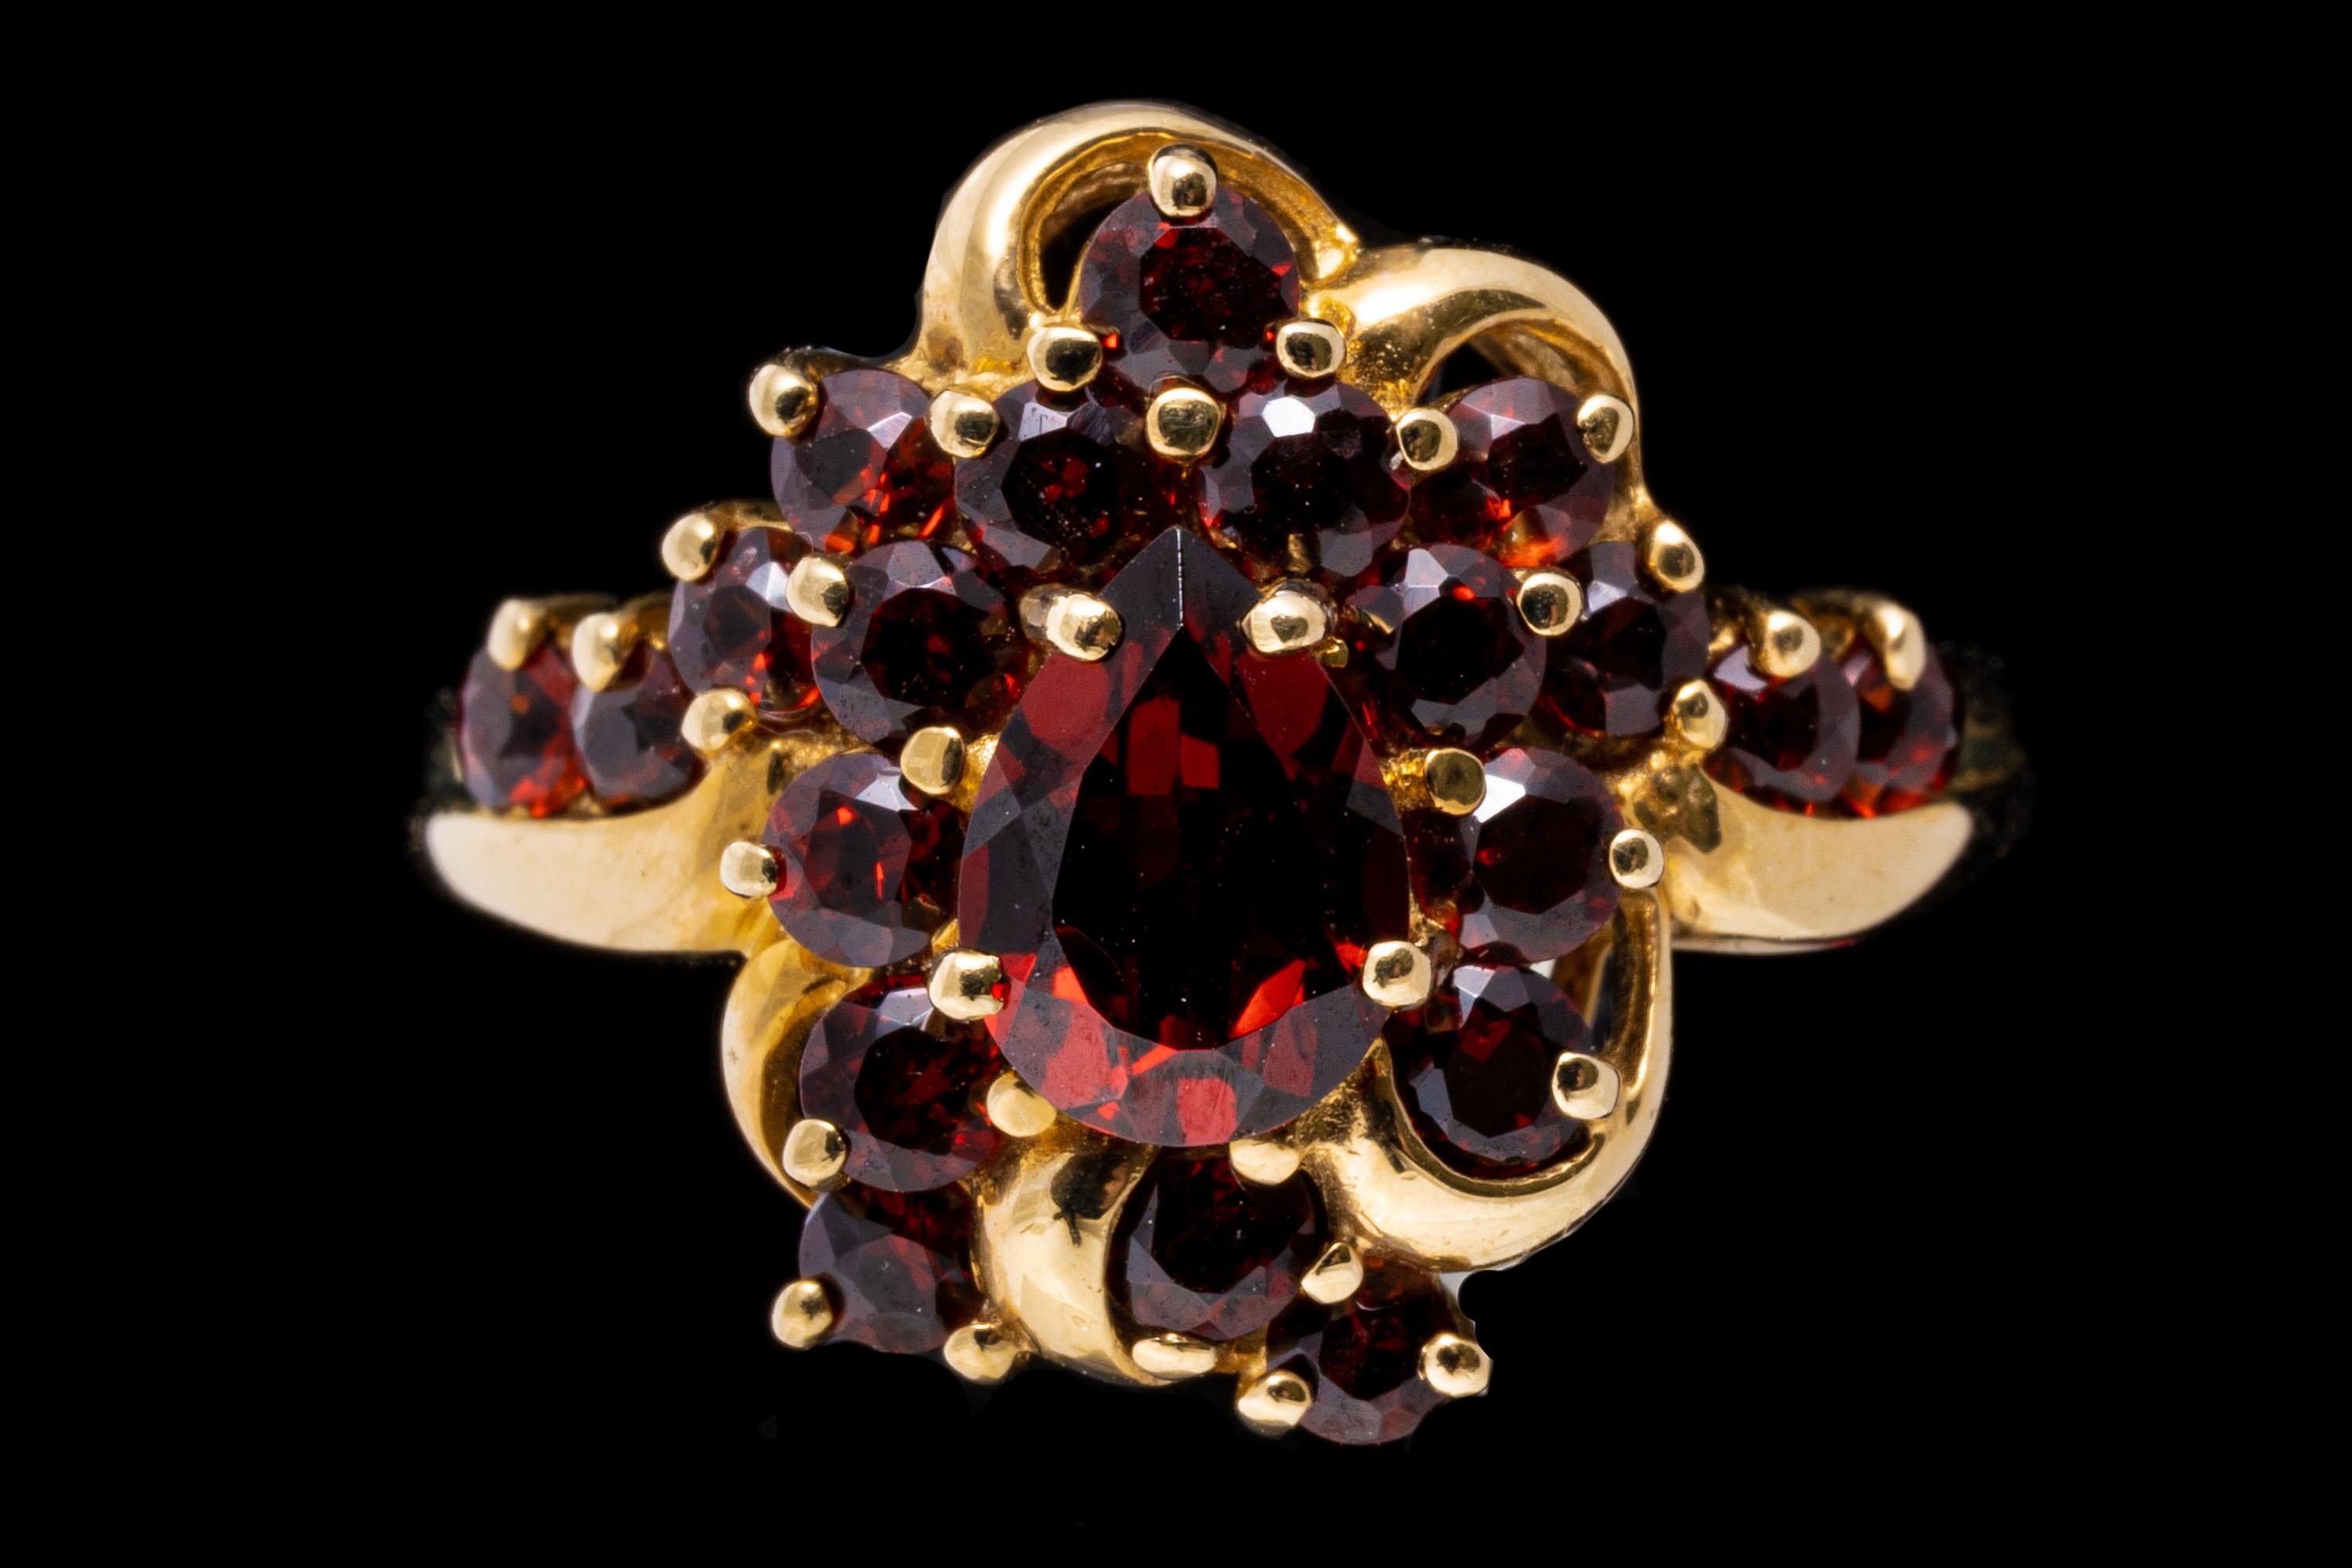 14k yellow gold ring. 14k yellow gold ornate almandine garnet cluster ring, set with a center pear shaped faceted, burgundy color garnet, approximately 0.45 CTS, surrounded by a swirled halo of round faceted garnets, approximately 1.14 TCW, which